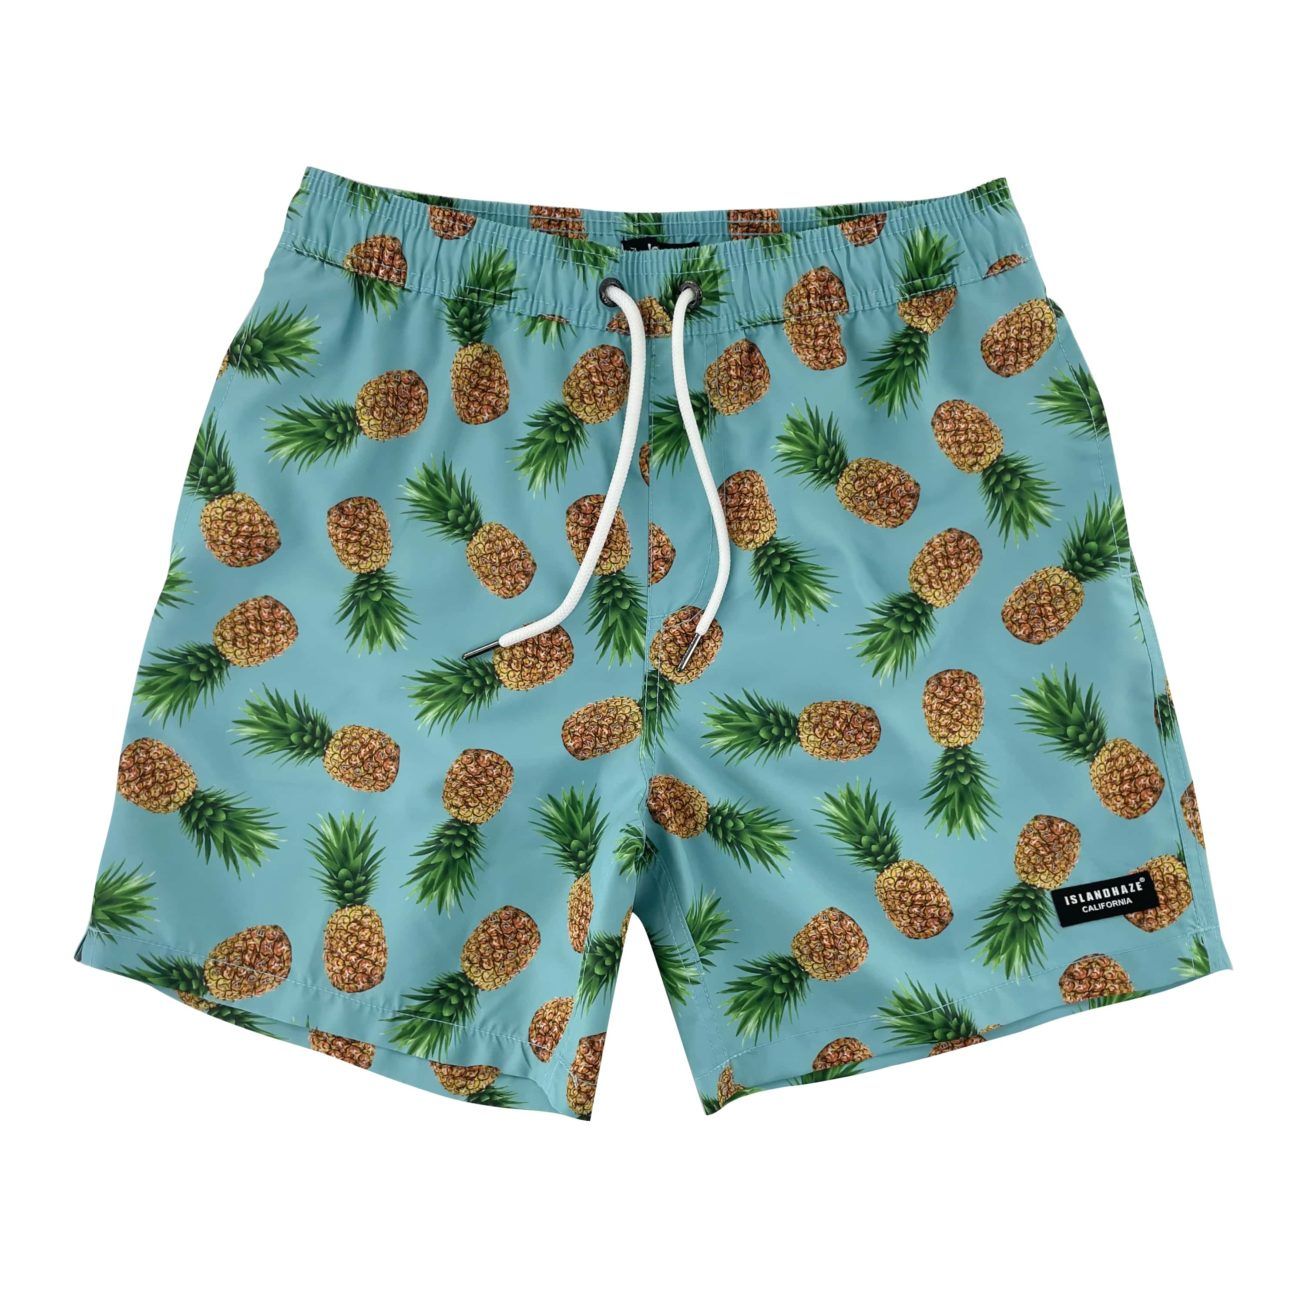 IslandHaze Swim Trunks Pineapples - From the Gecko Boutique